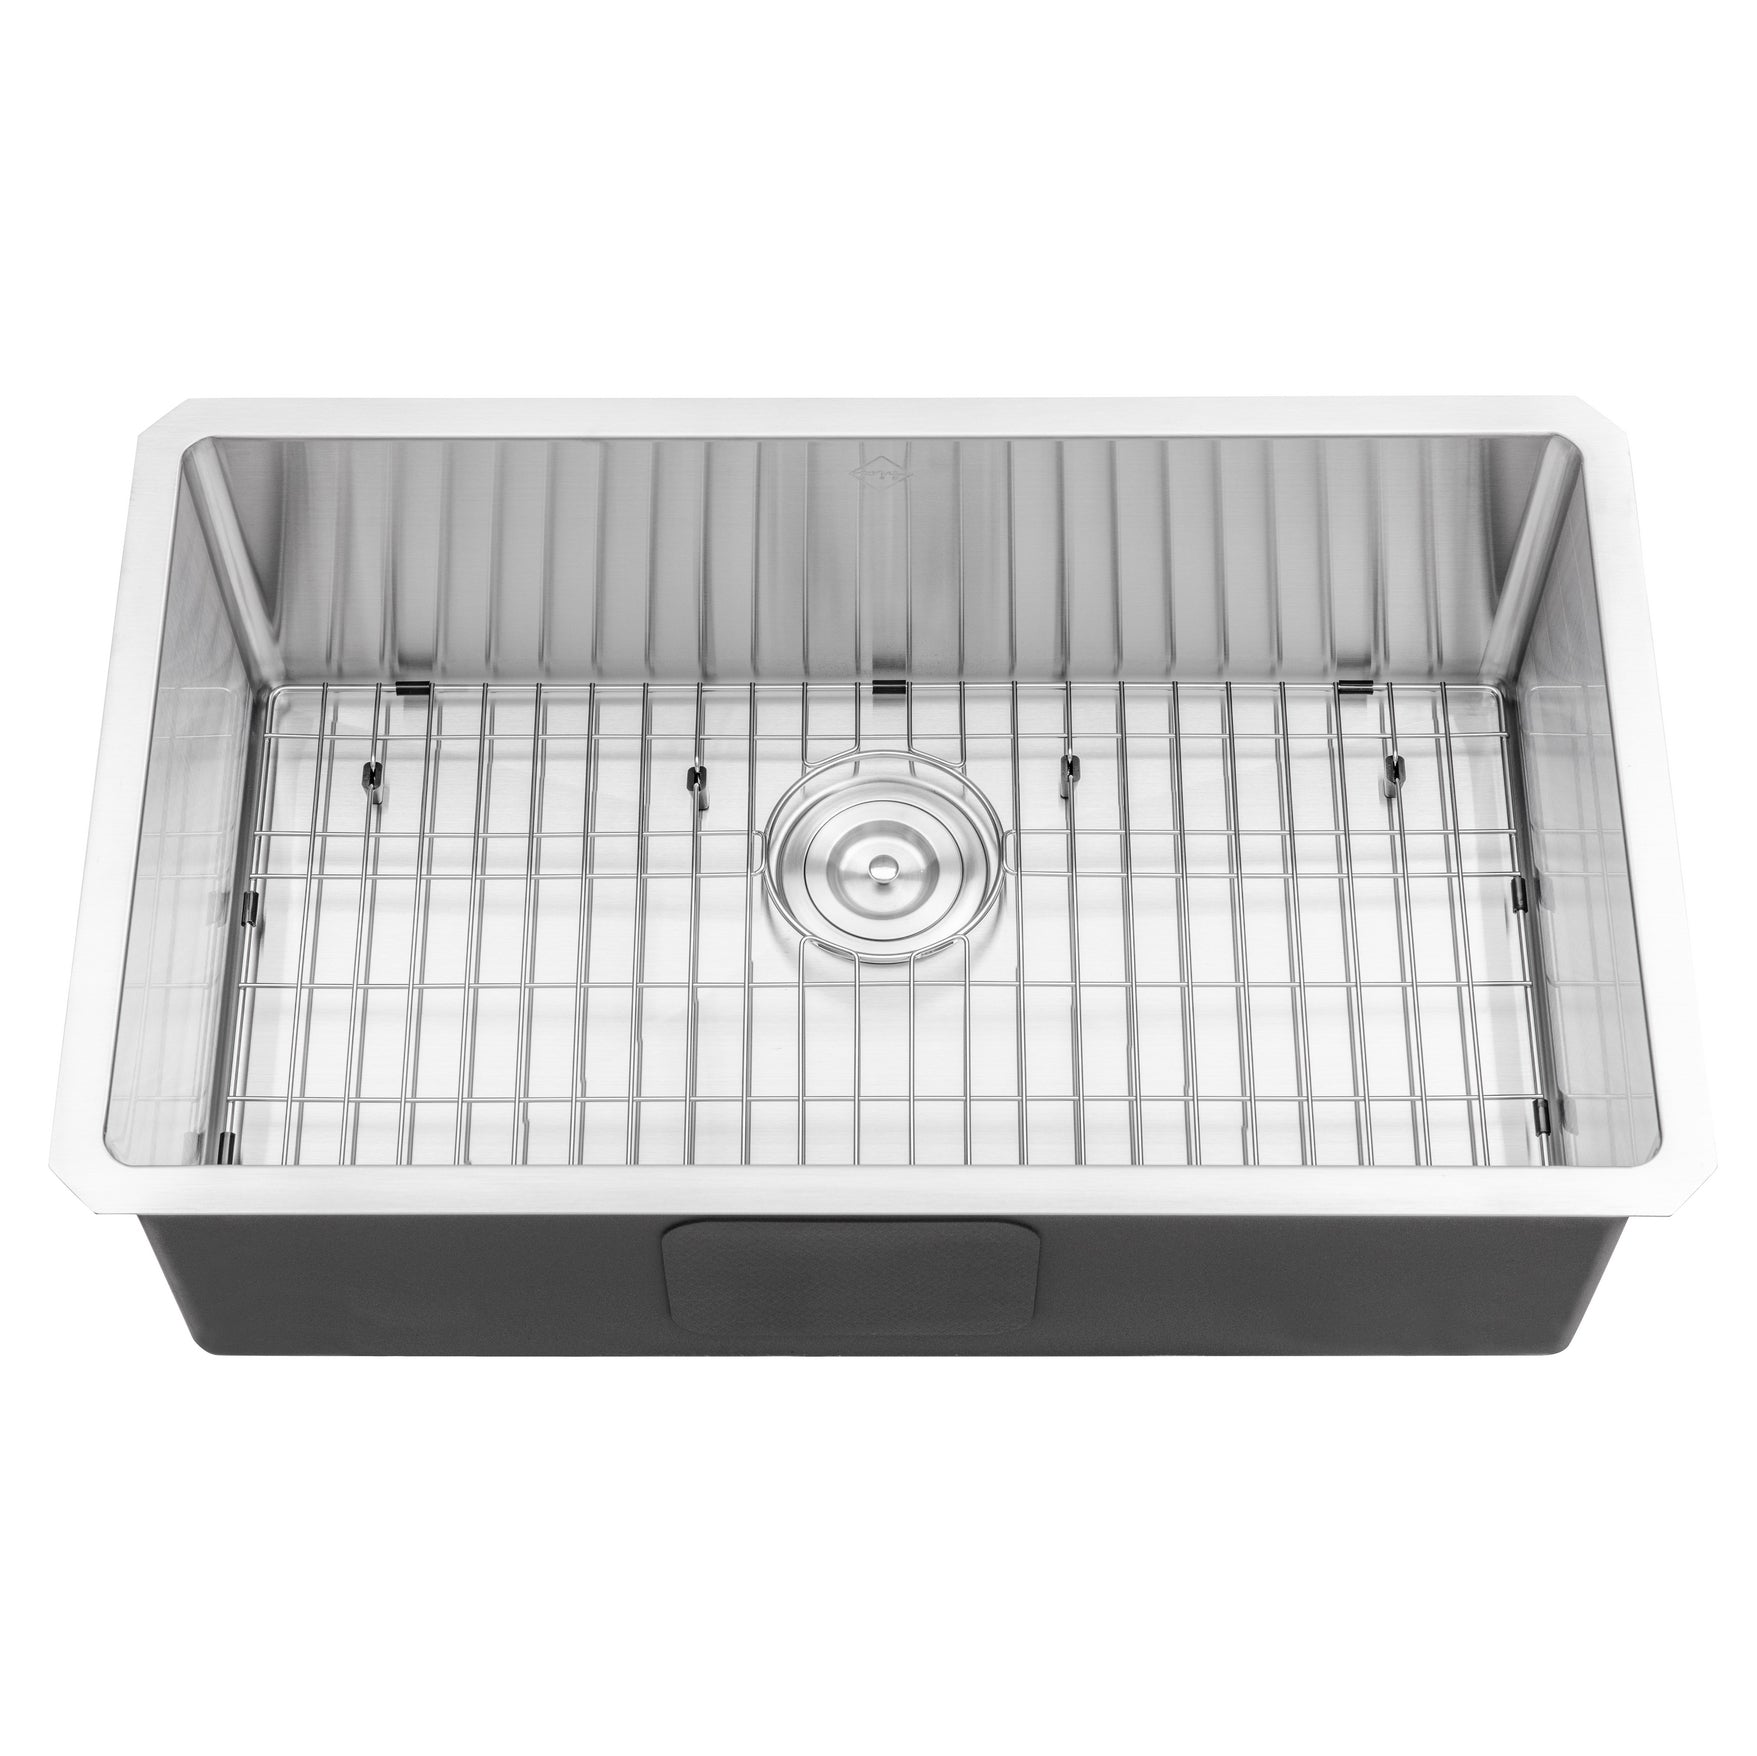 Stainless Steel Bottom Grid For Undermount Stainless Steel Single Bowl Kitchen Sink